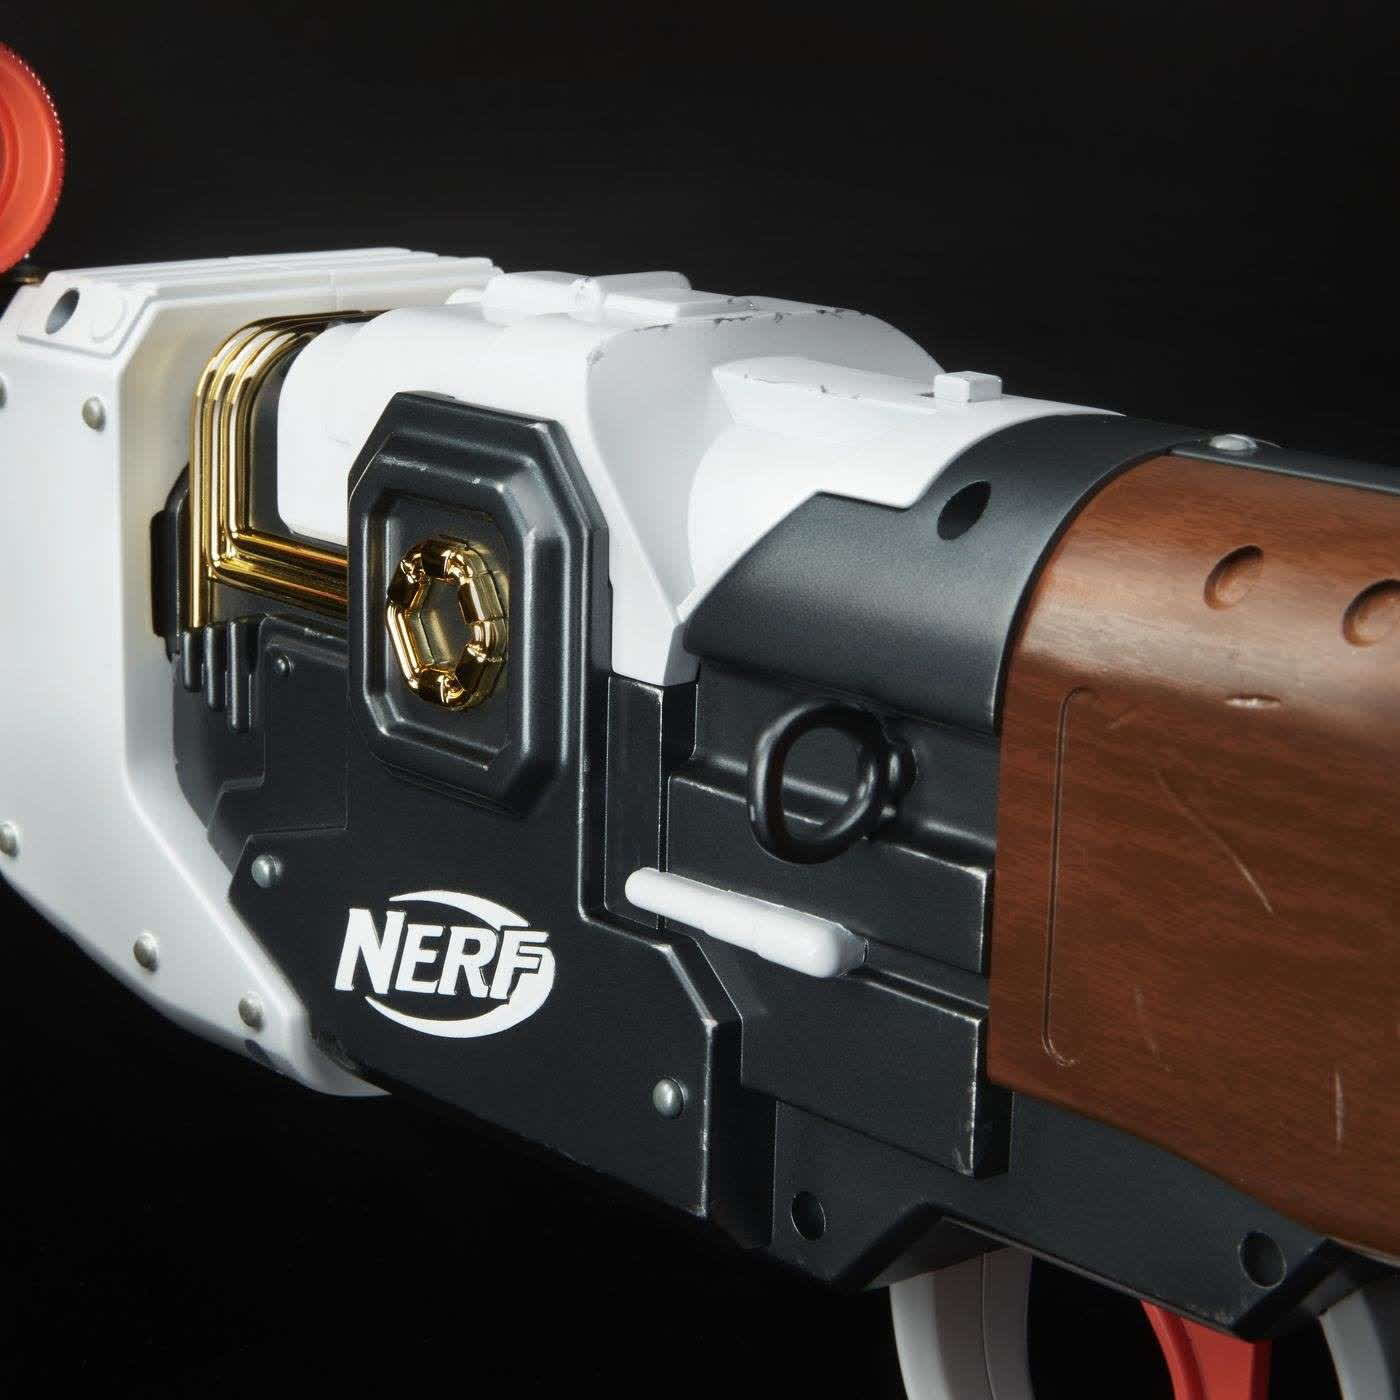 Fremsyn lejlighed følelsesmæssig Hasbro will sell a Nerf replica of The Mandalorian's unique Amban  phase-pulse blaster rifle | TechSpot